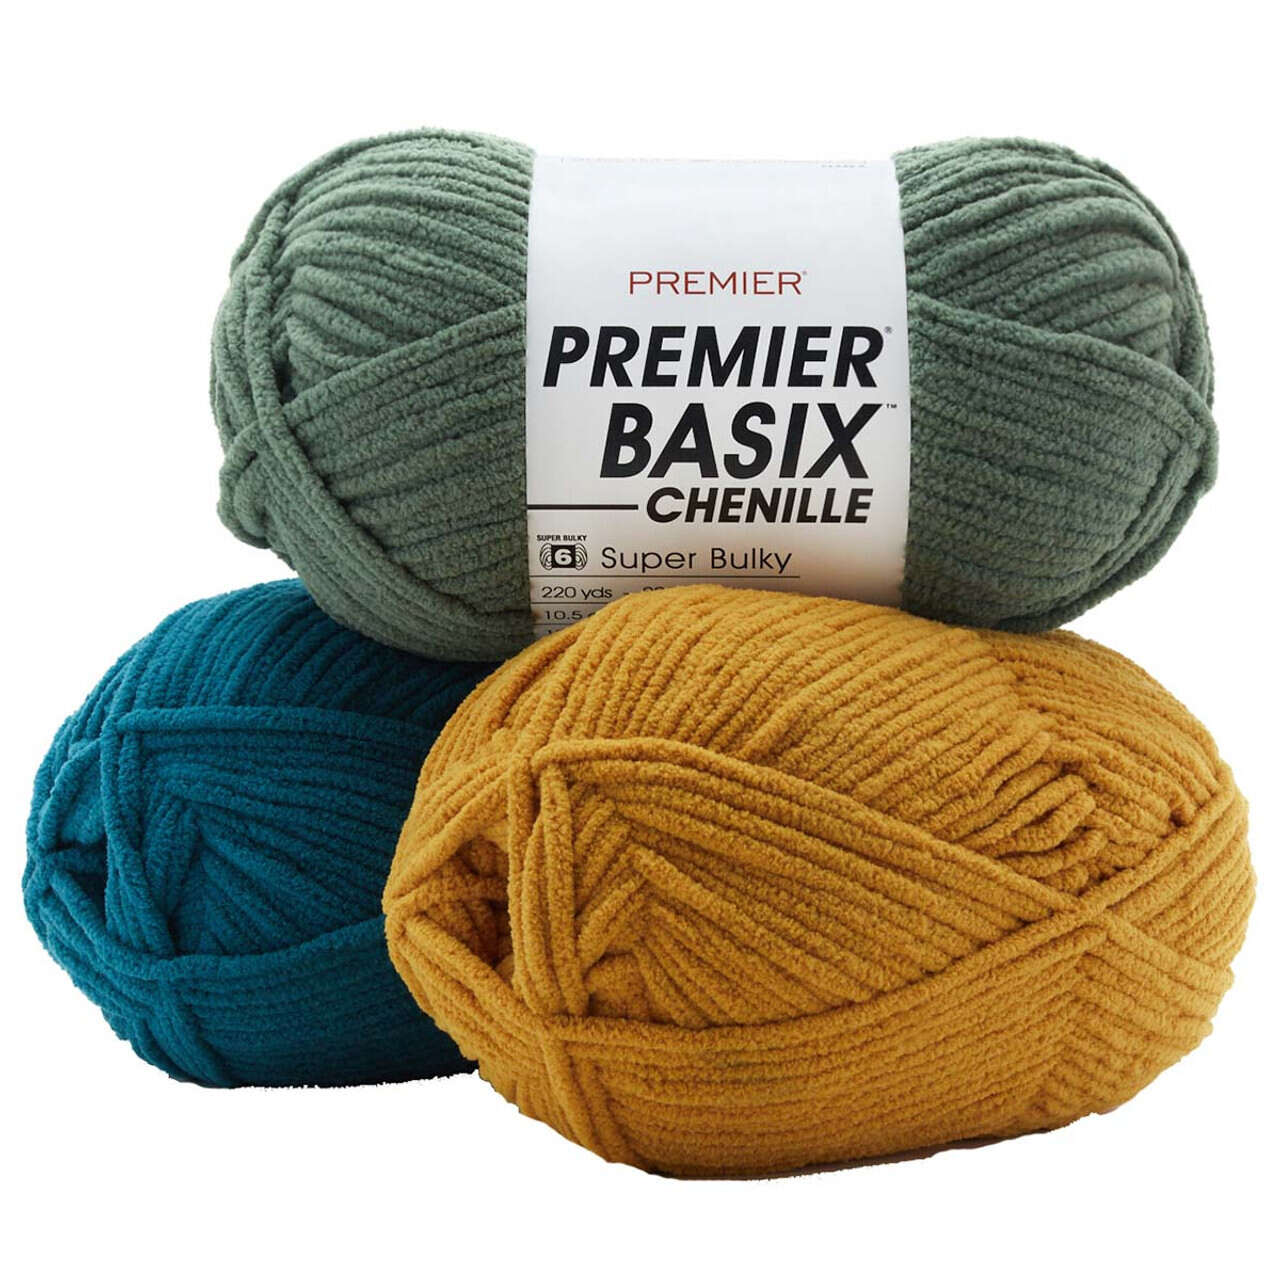  Premier Yarns Basix Chenille Brights Yarn - 5.3 Oz - #6 Super  Bulky Weight - 3 Pack Bundle with Bella's Crafts Stitch Markers (Black)